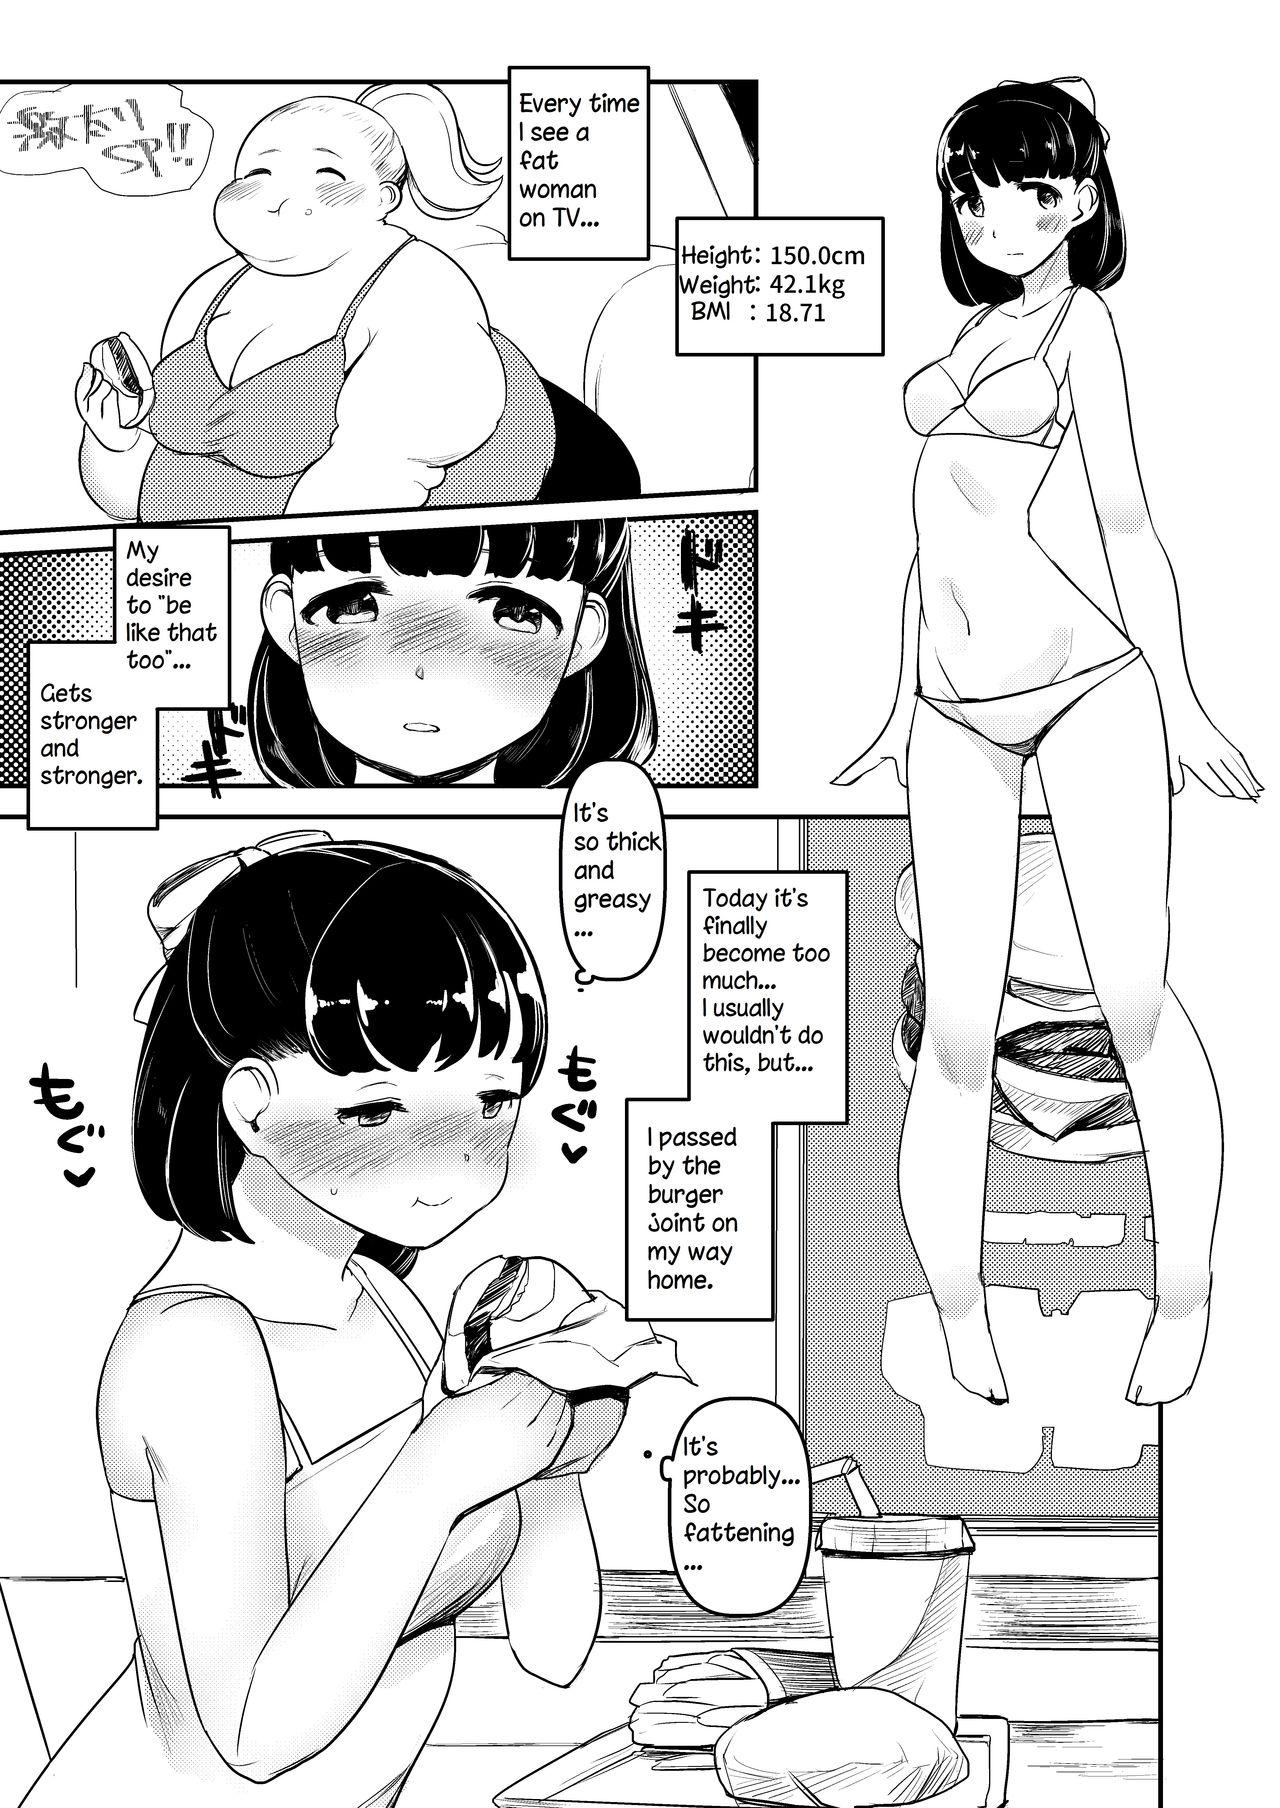 Ink Ayano's Weight Gain Diary Relax - Page 1